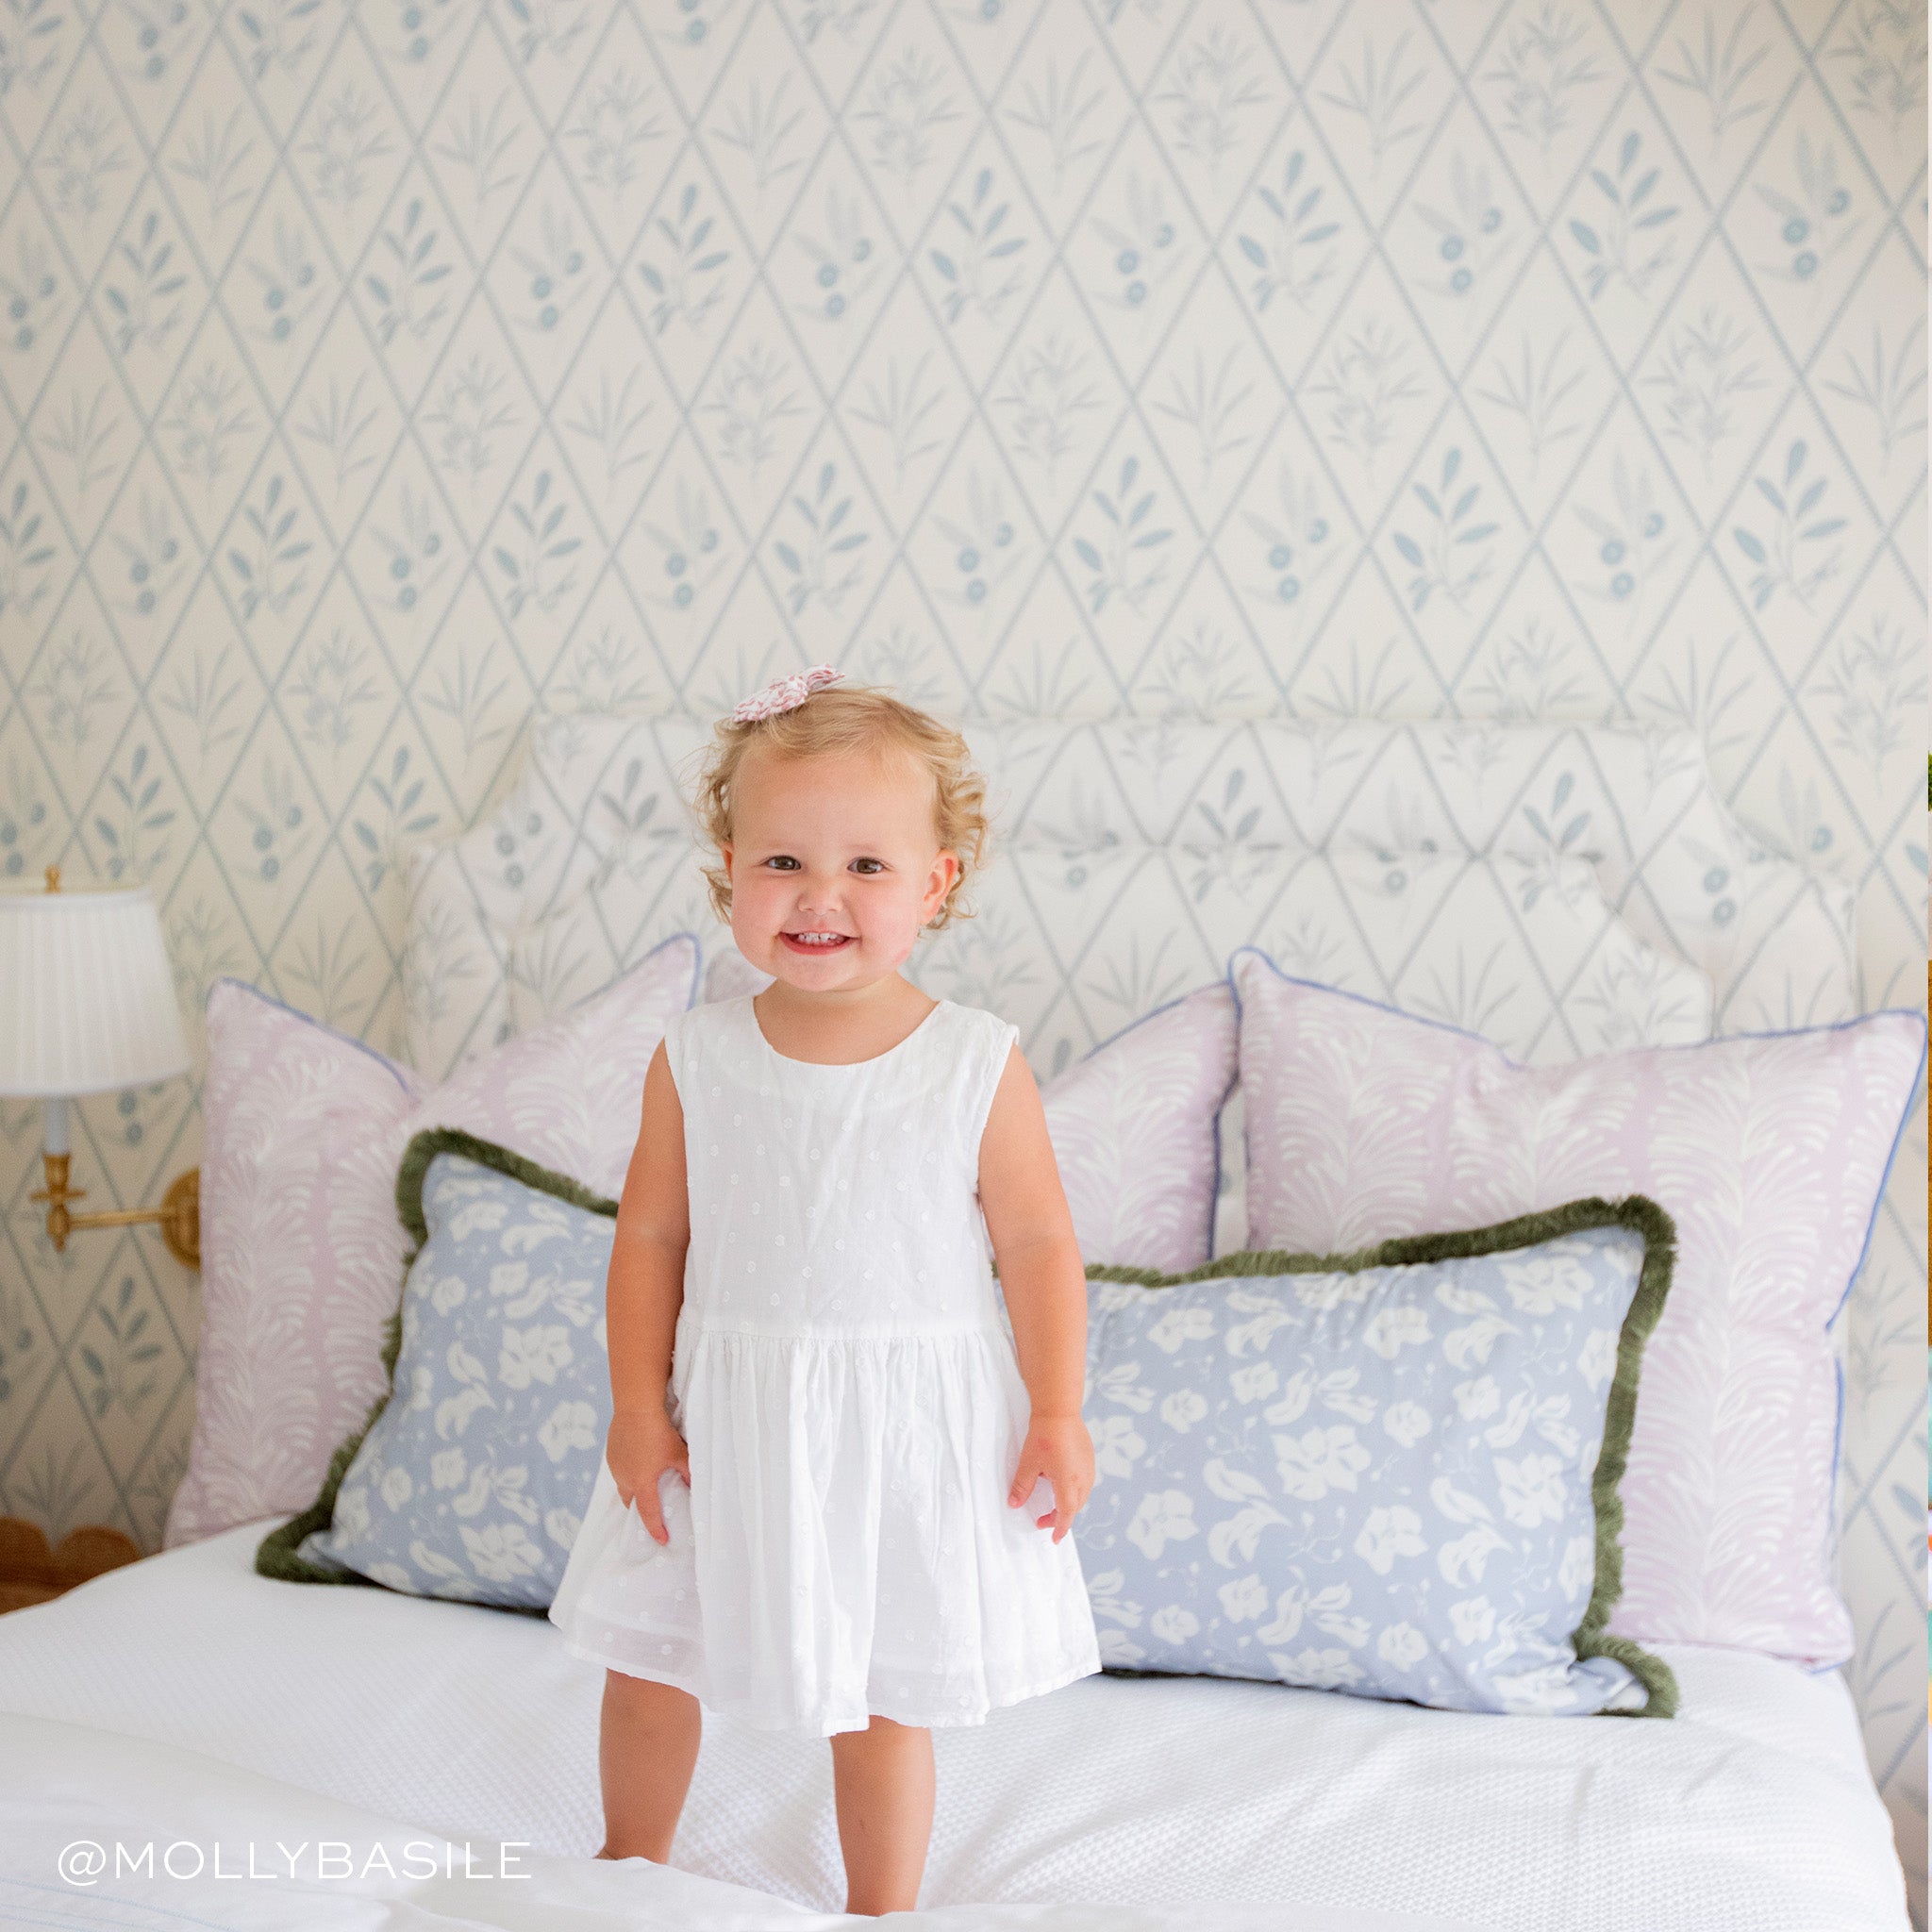 Bed styled with three Lavender Botanical Stripe Printed Pillows and one blue floral printed lumbar with sage fringe on white sheets with baby with a white dress and bow on the hair. Photo taken by Molly Basile